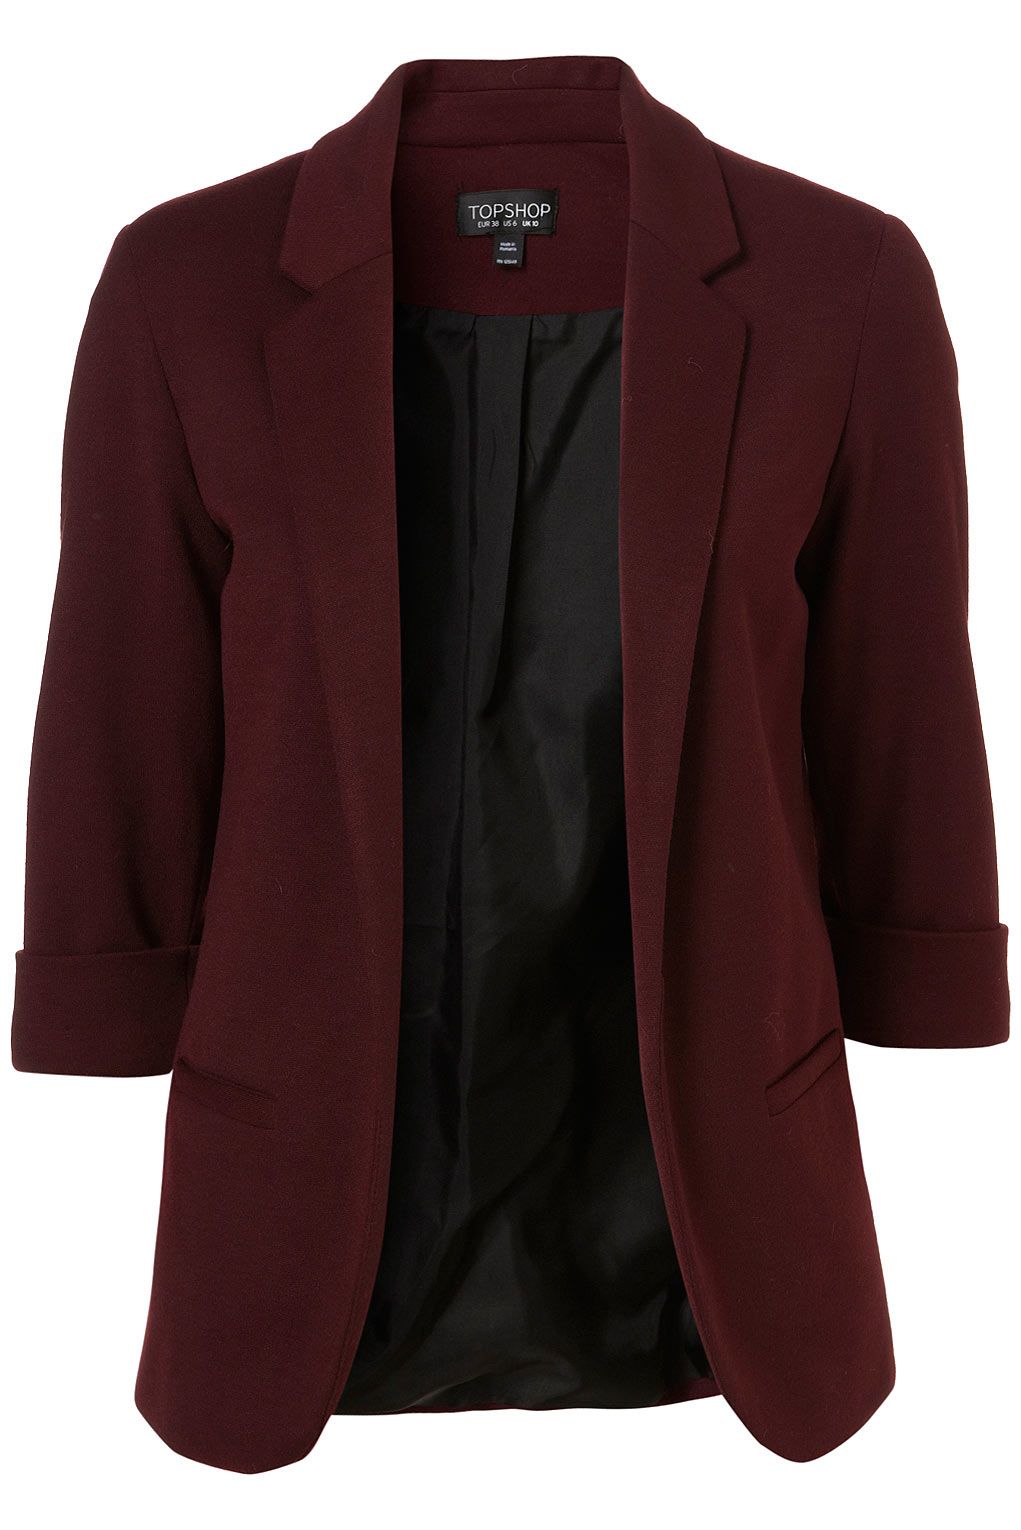 Elevate Your Look with Maroon Blazers for Every Occasion